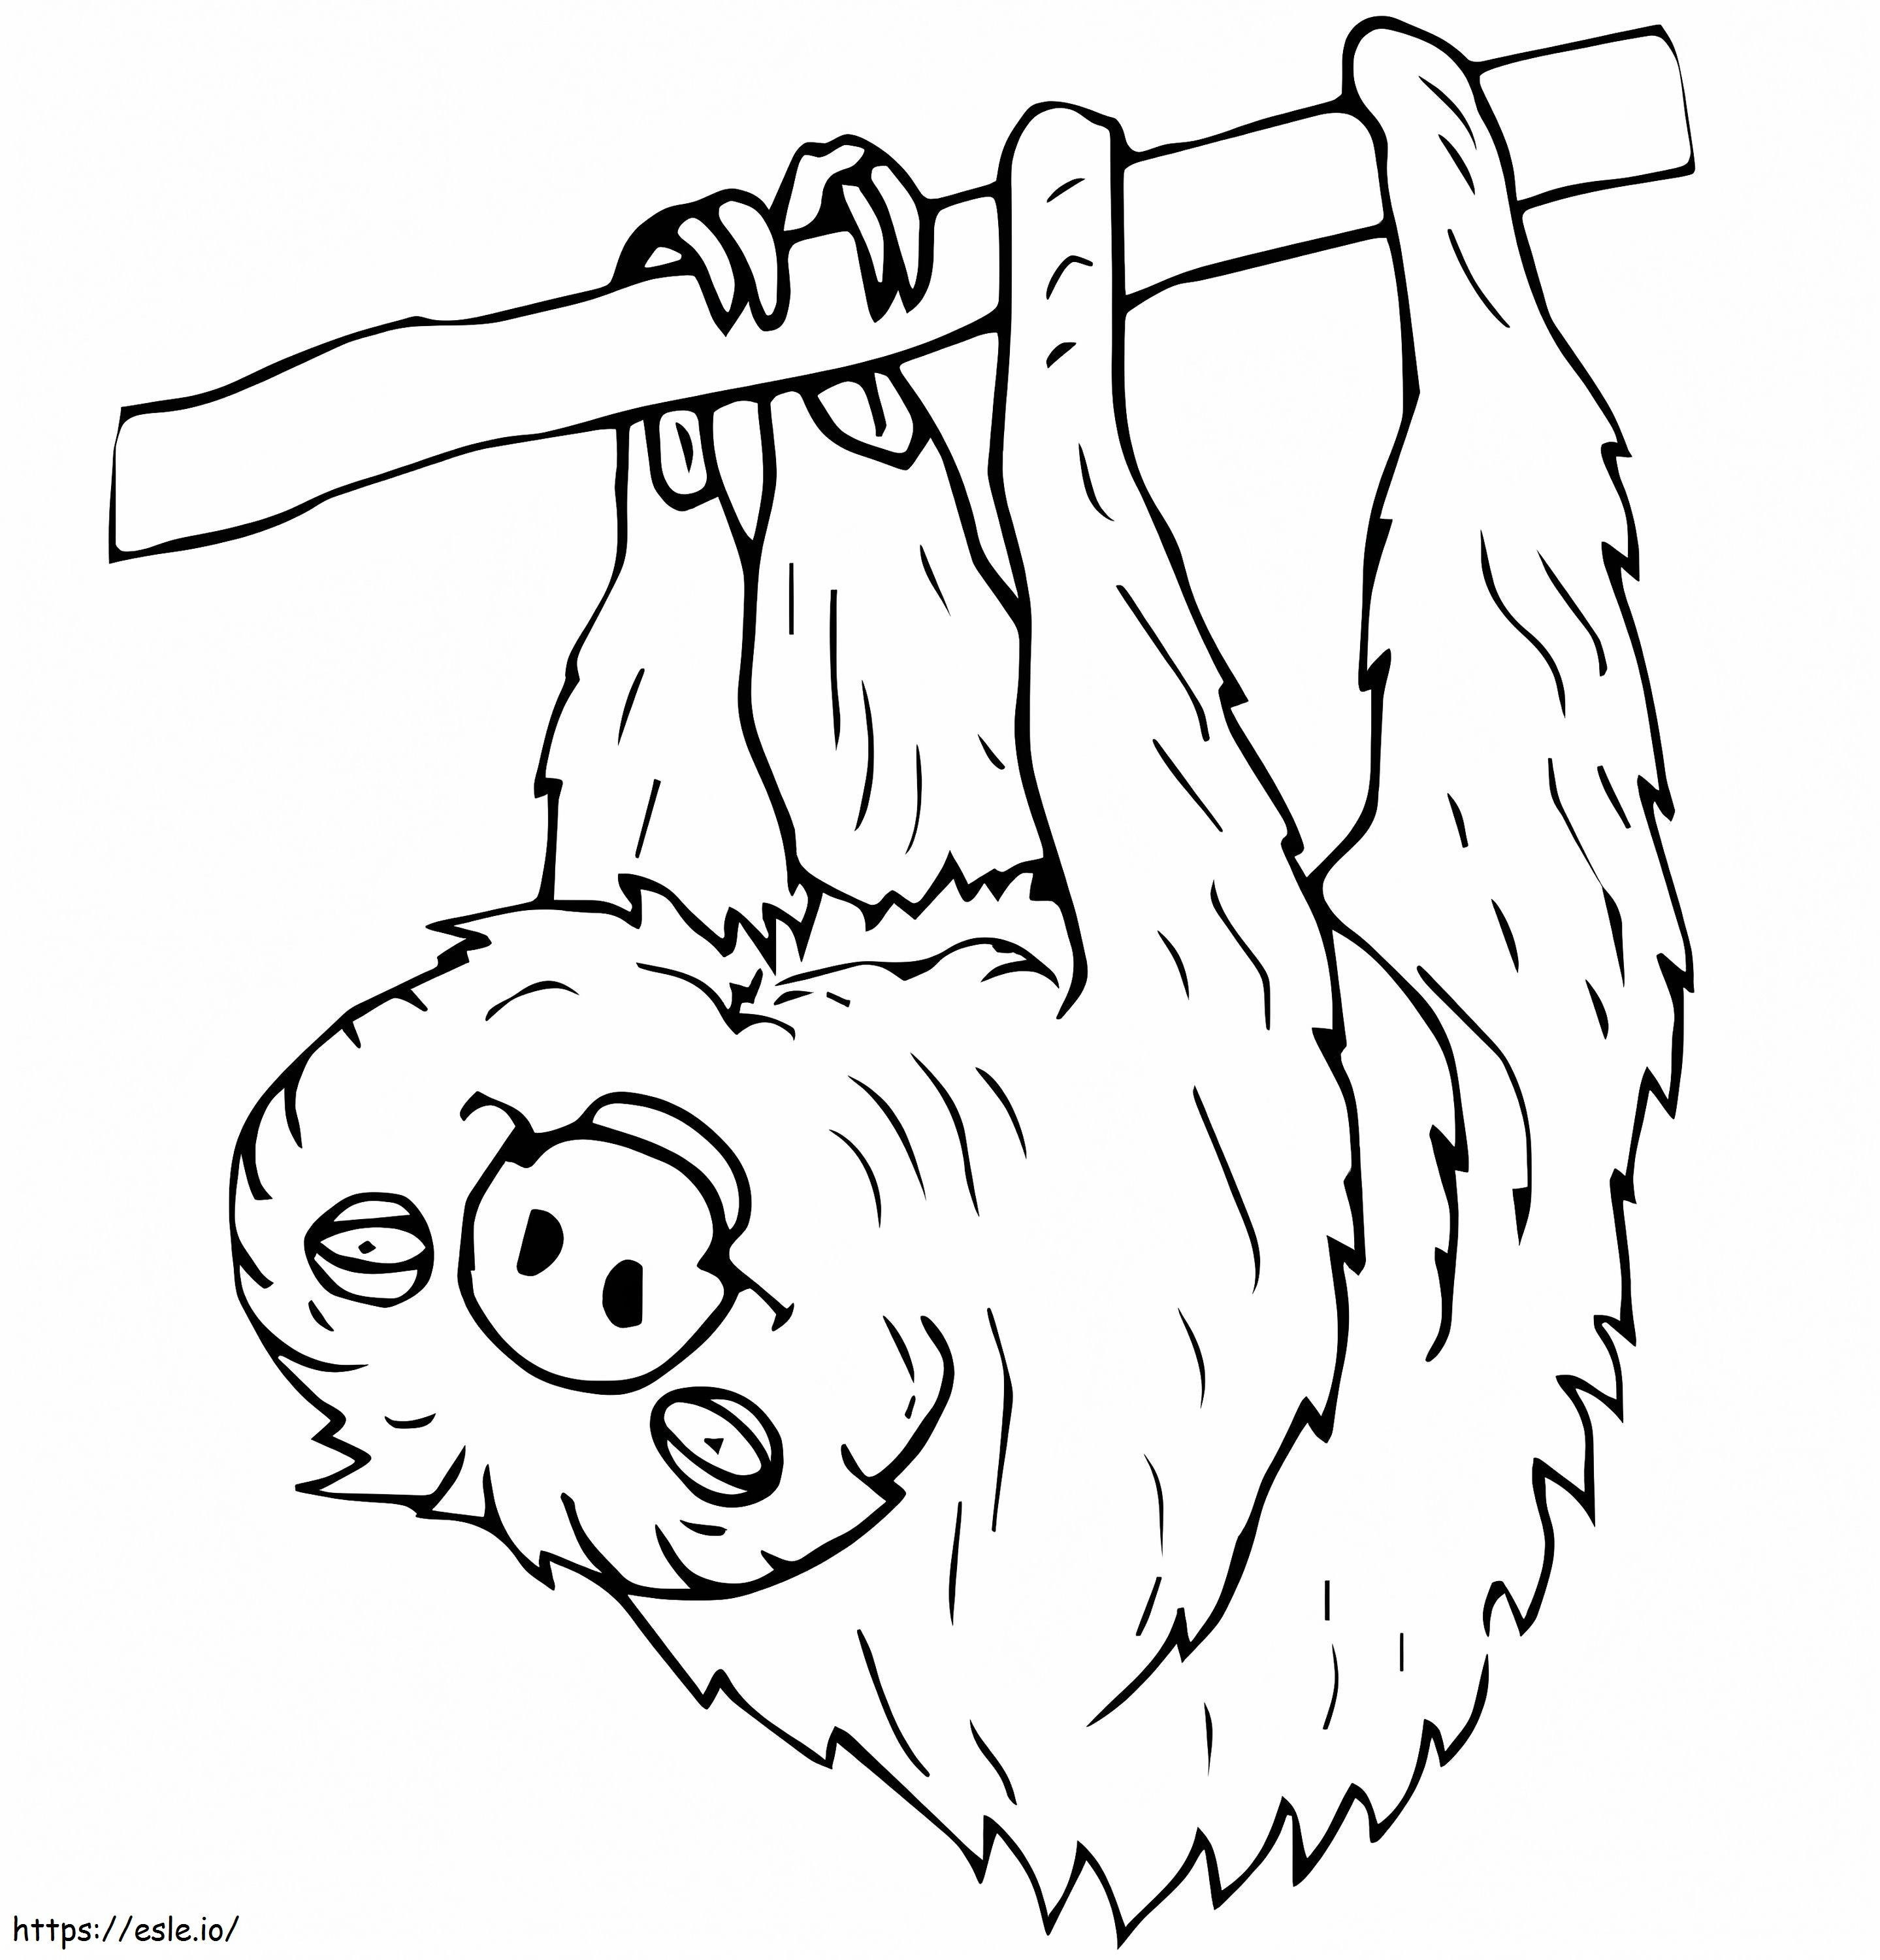 Two Toed Sloth 1 coloring page